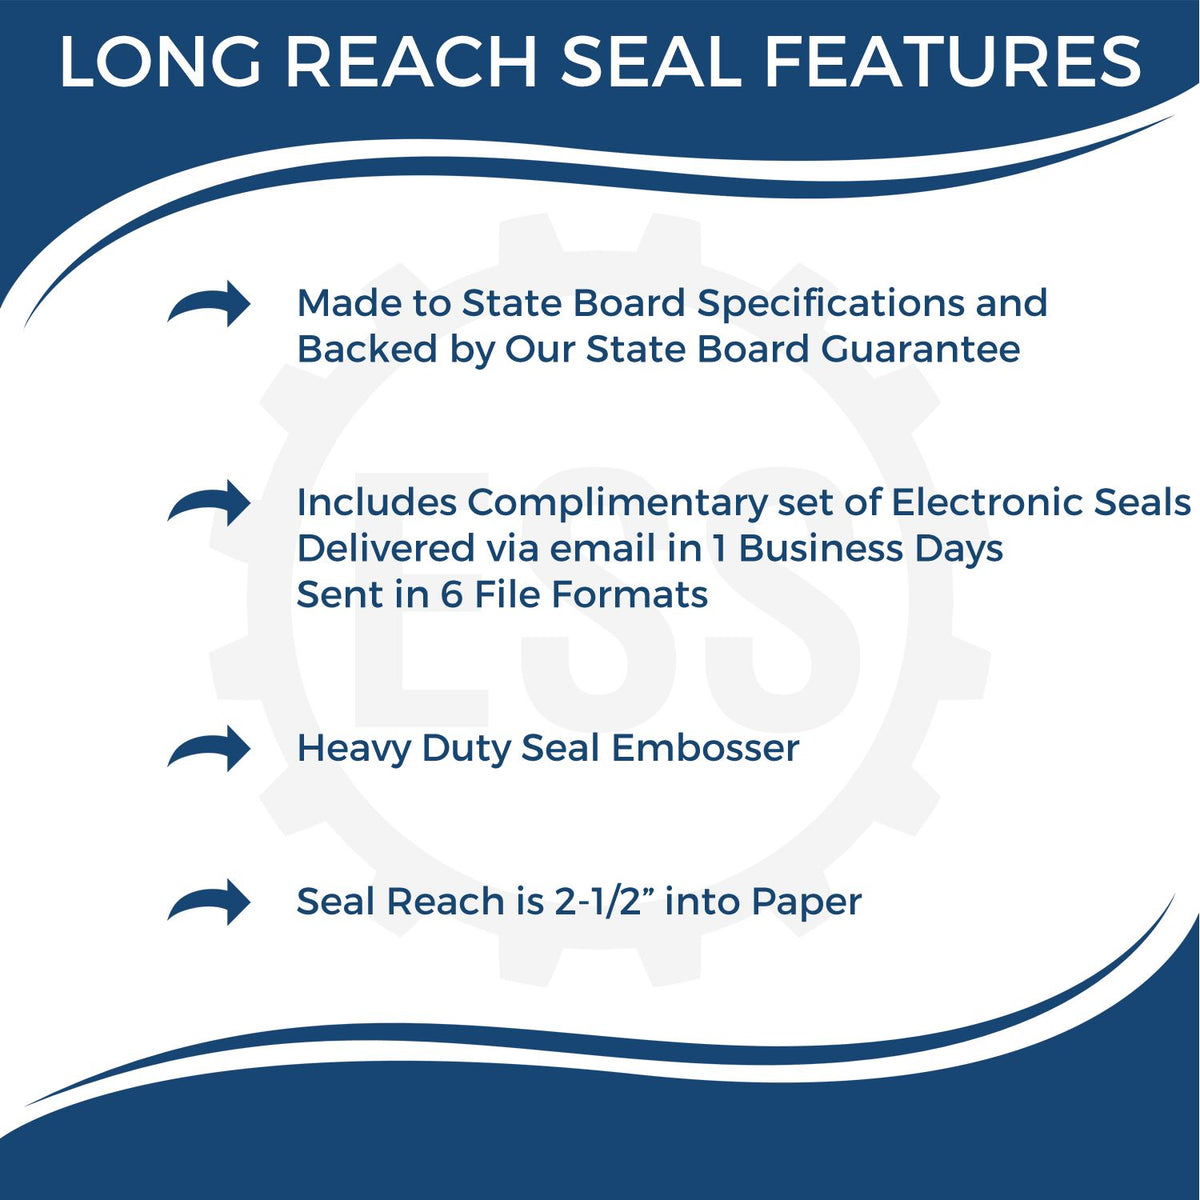 A picture of an infographic highlighting the selling points for the Long Reach North Carolina PE Seal